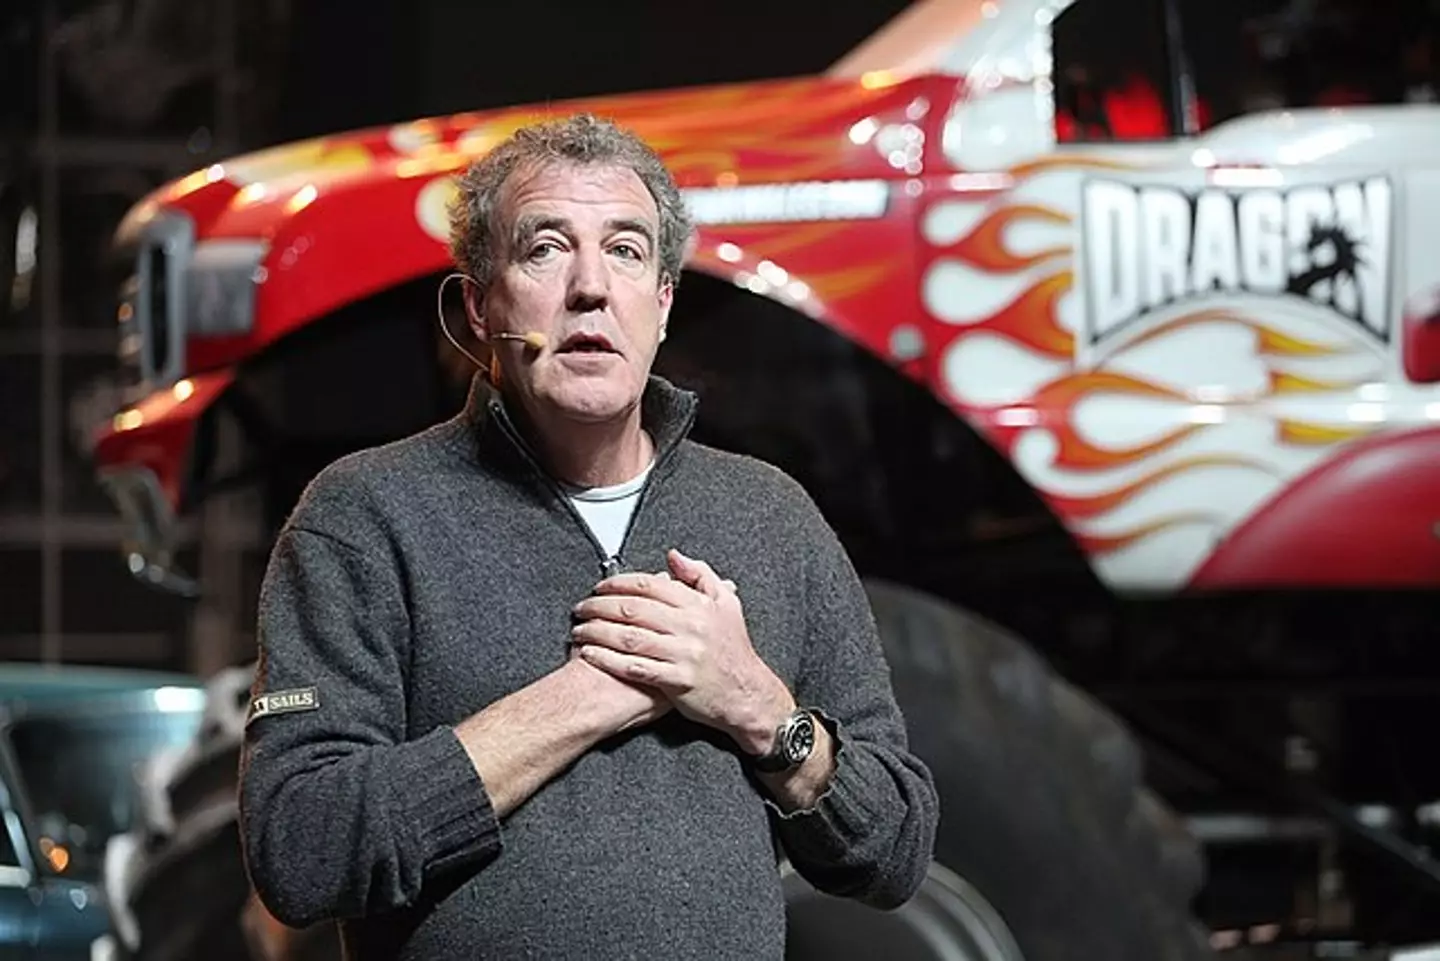 Clarkson won't be heading back to the Beeb anytime soon.